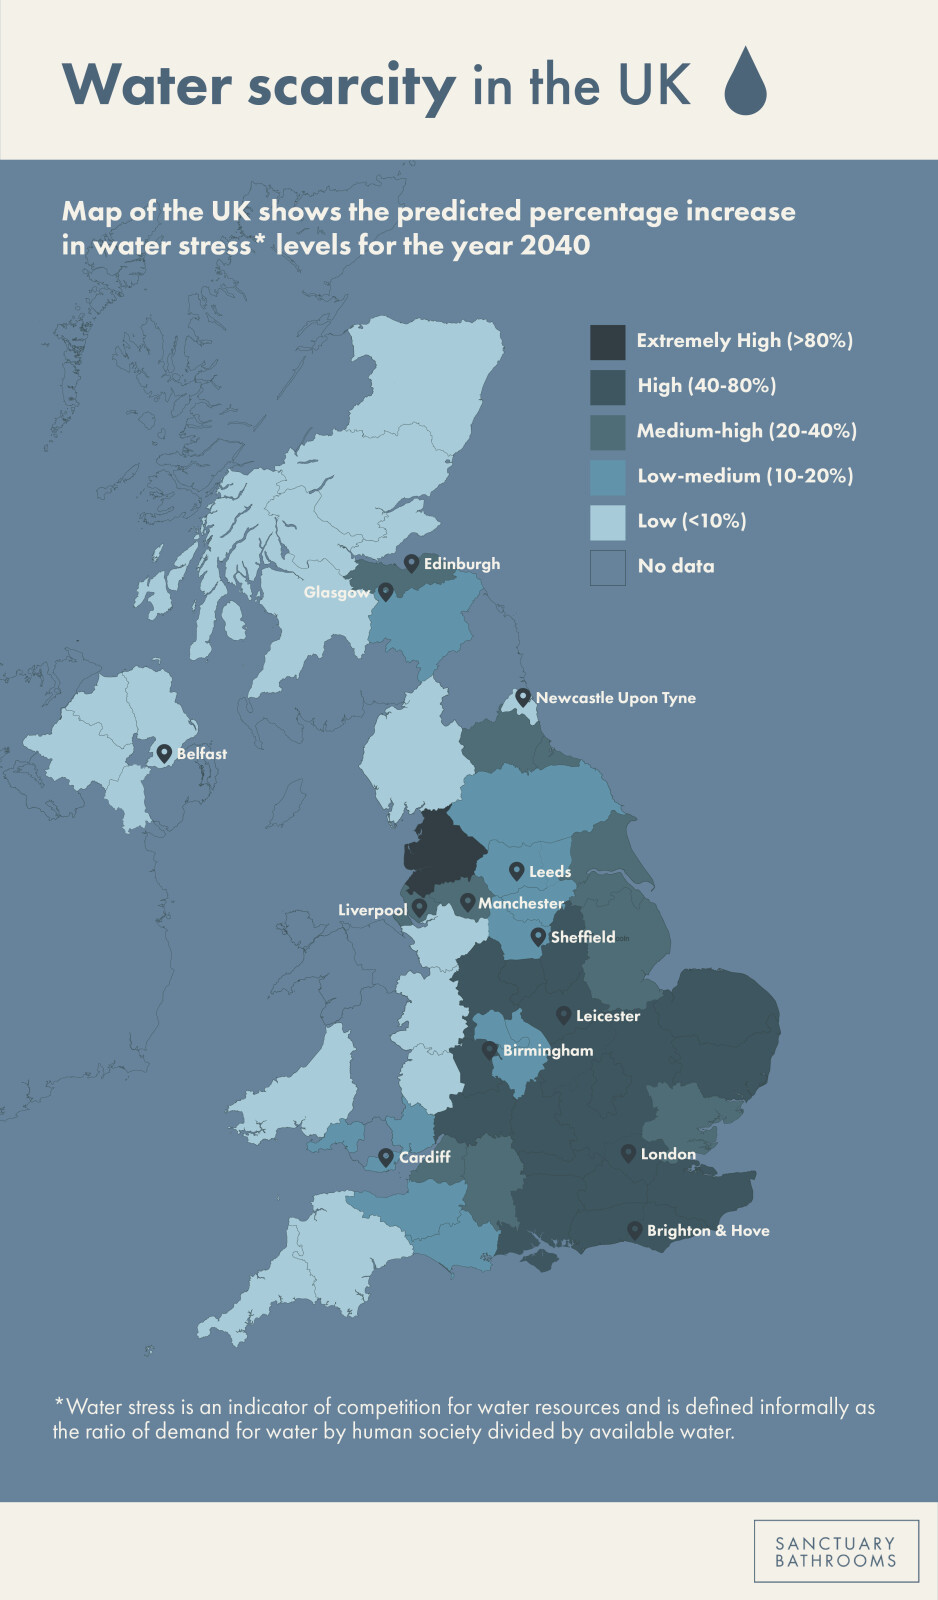 Graphic image of a water scarcity map of the UK